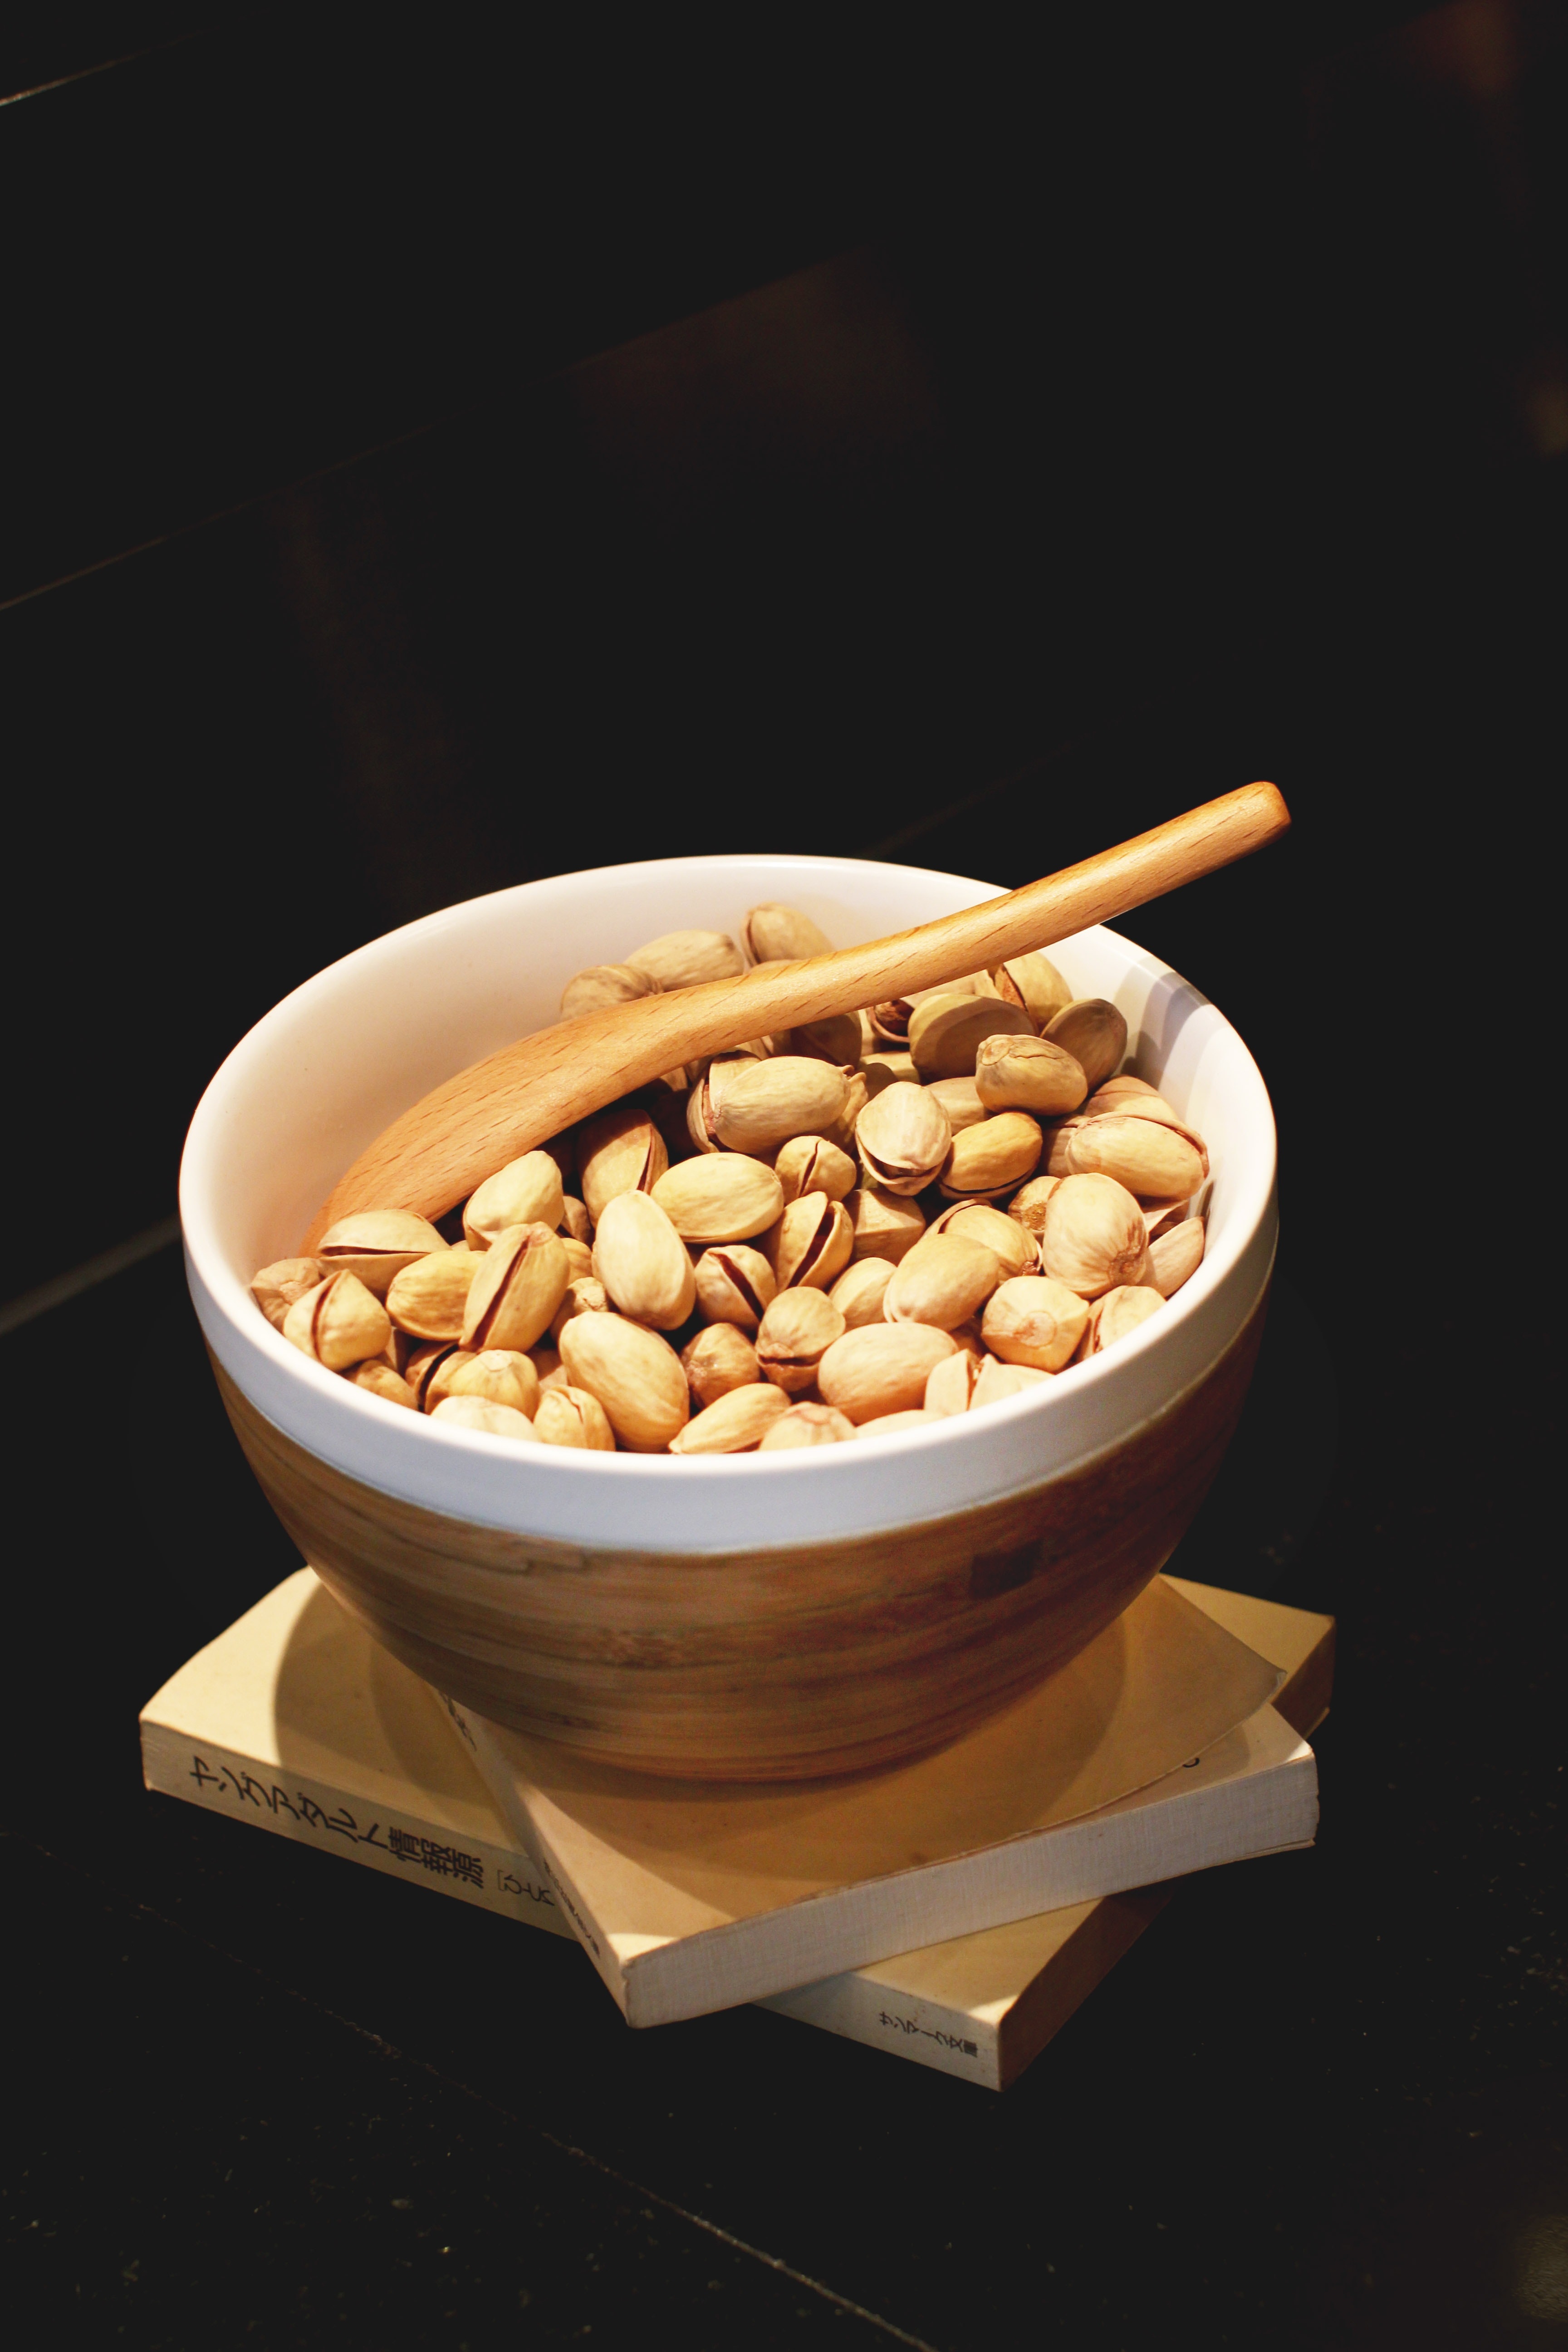 Pistachio nuts in white and brown ceramic bowl with brown wooden spoon photo